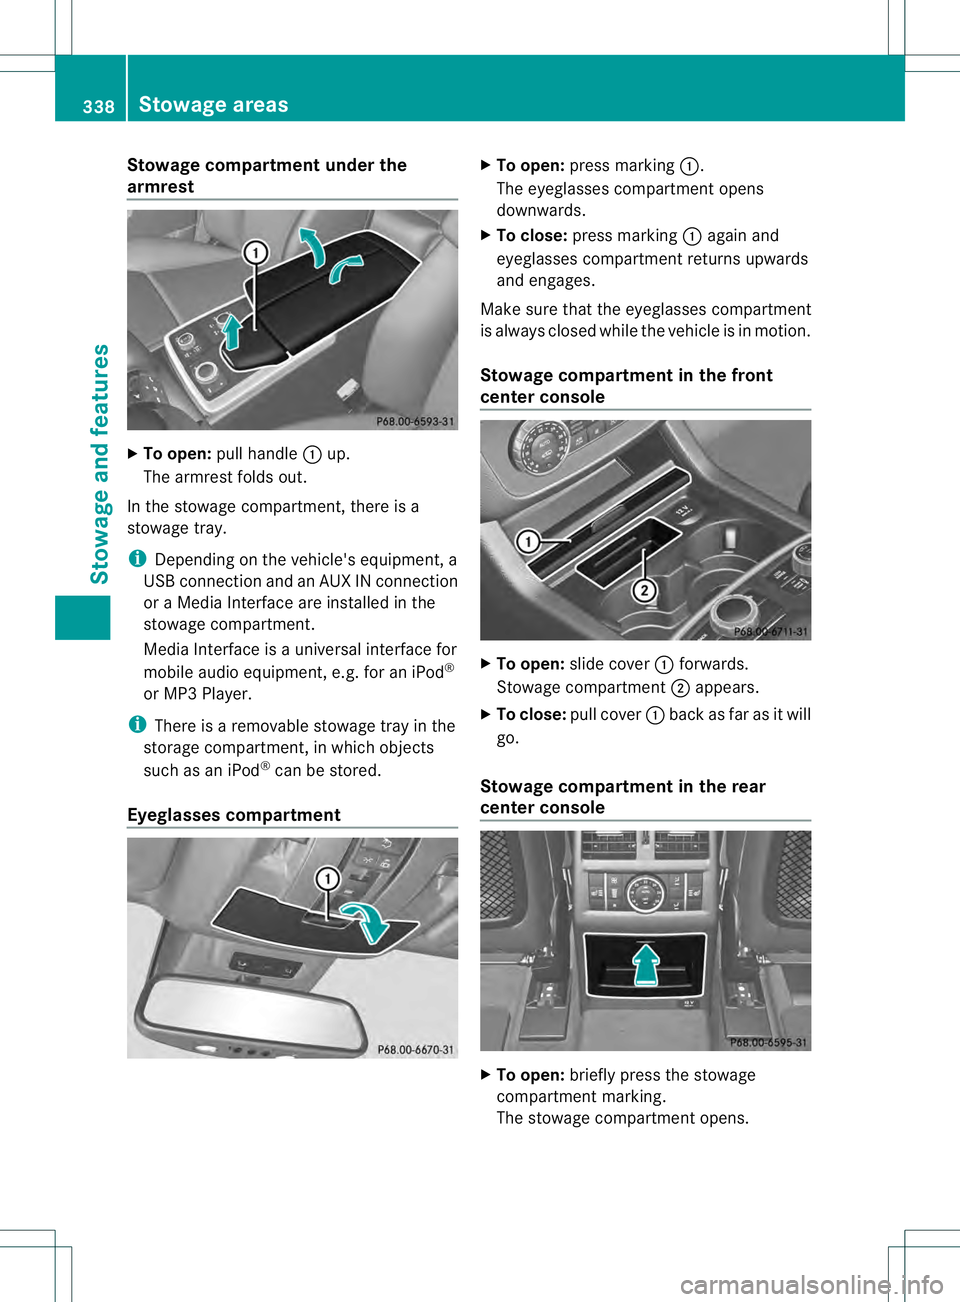 MERCEDES-BENZ GL 2013  Owners Manual Stowage compartment under the
armrest
X
To open: pull handle 0002up.
The armrest folds out.
In the stowage compartment, there is a
stowage tray.
i Depending on the vehicle's equipment, a
USB conne